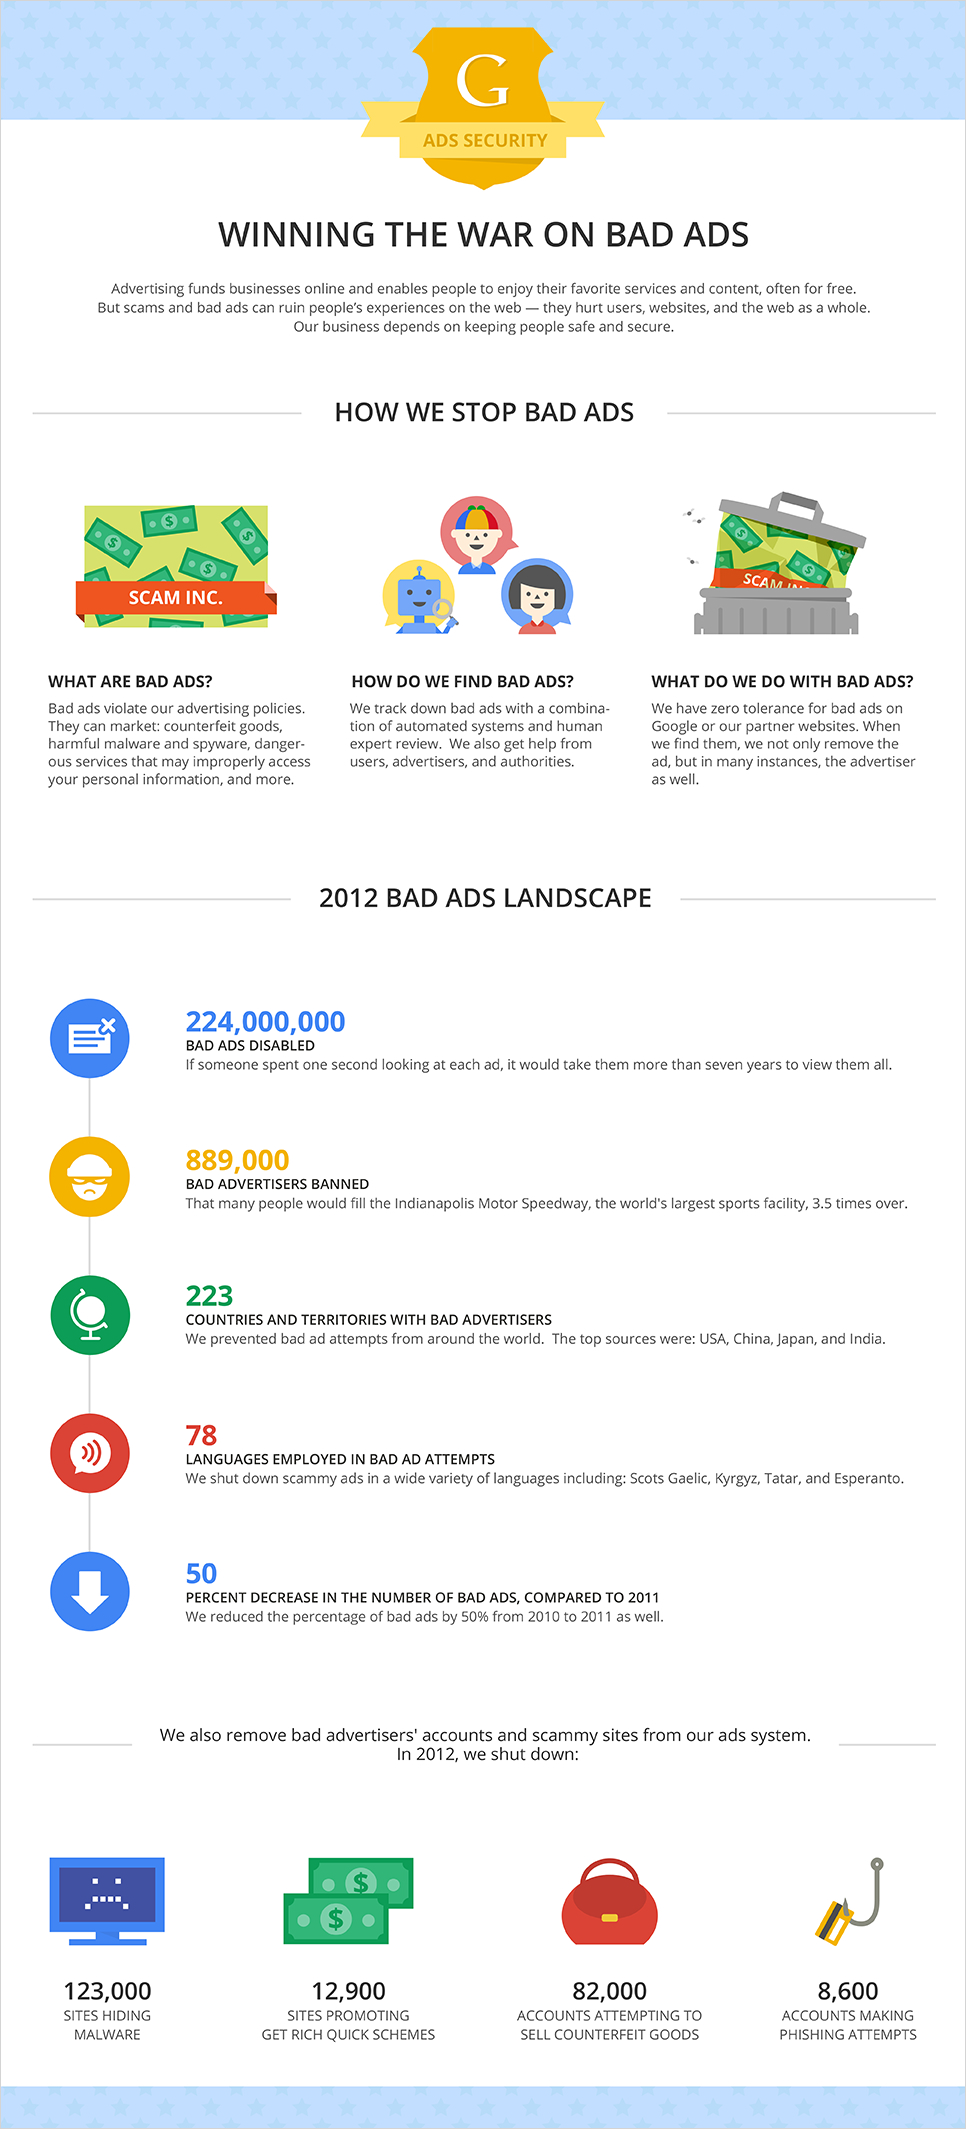 How Google is Winning the War on Bad Ads - Infographic